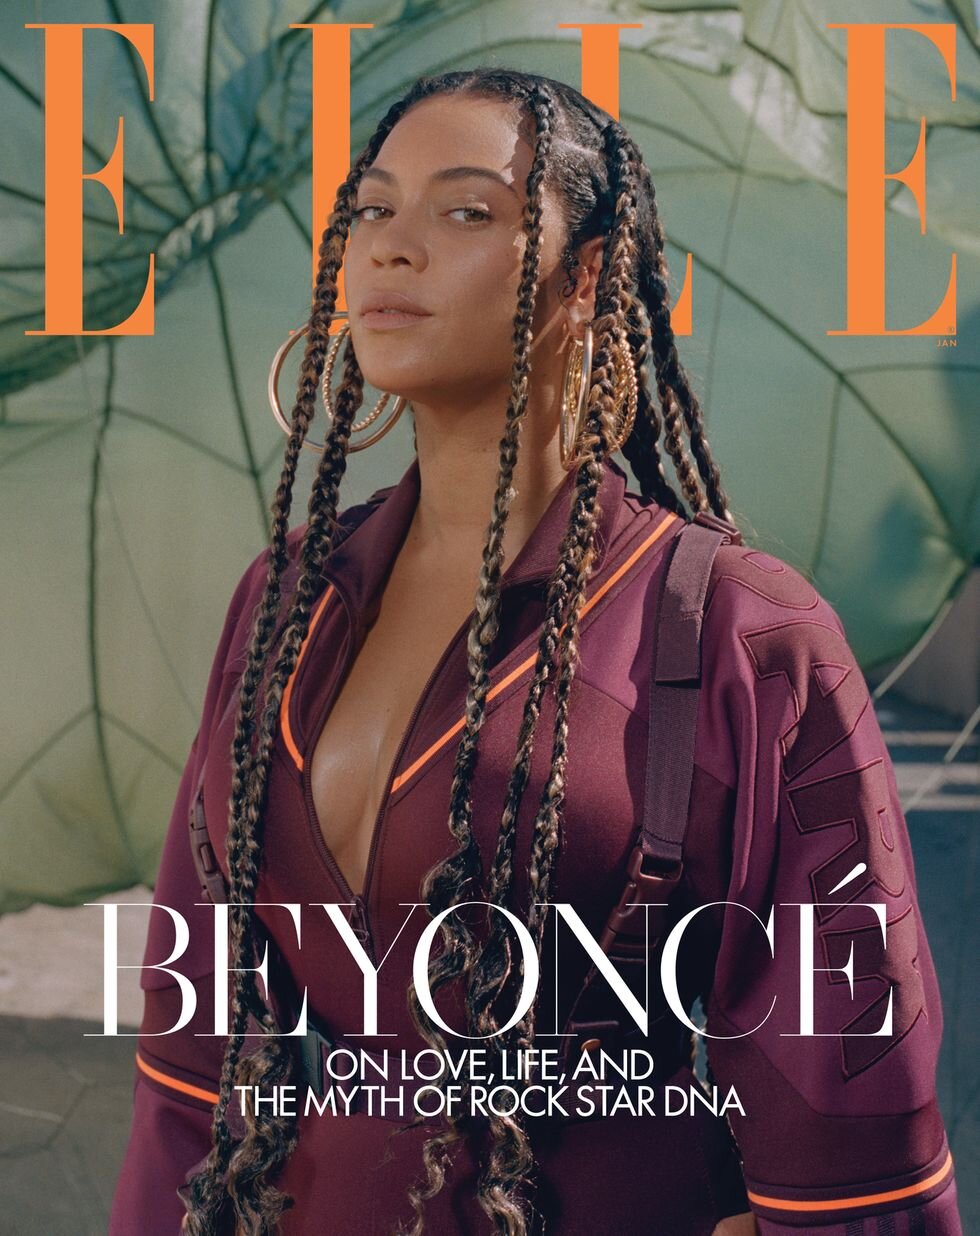  Track top bodysuit and harness bag, IVY PARK x adidas. Hoop earrings, Lana Jewelry. Beyonce by Melina Matsoukas for ELLE US January, 2020. 